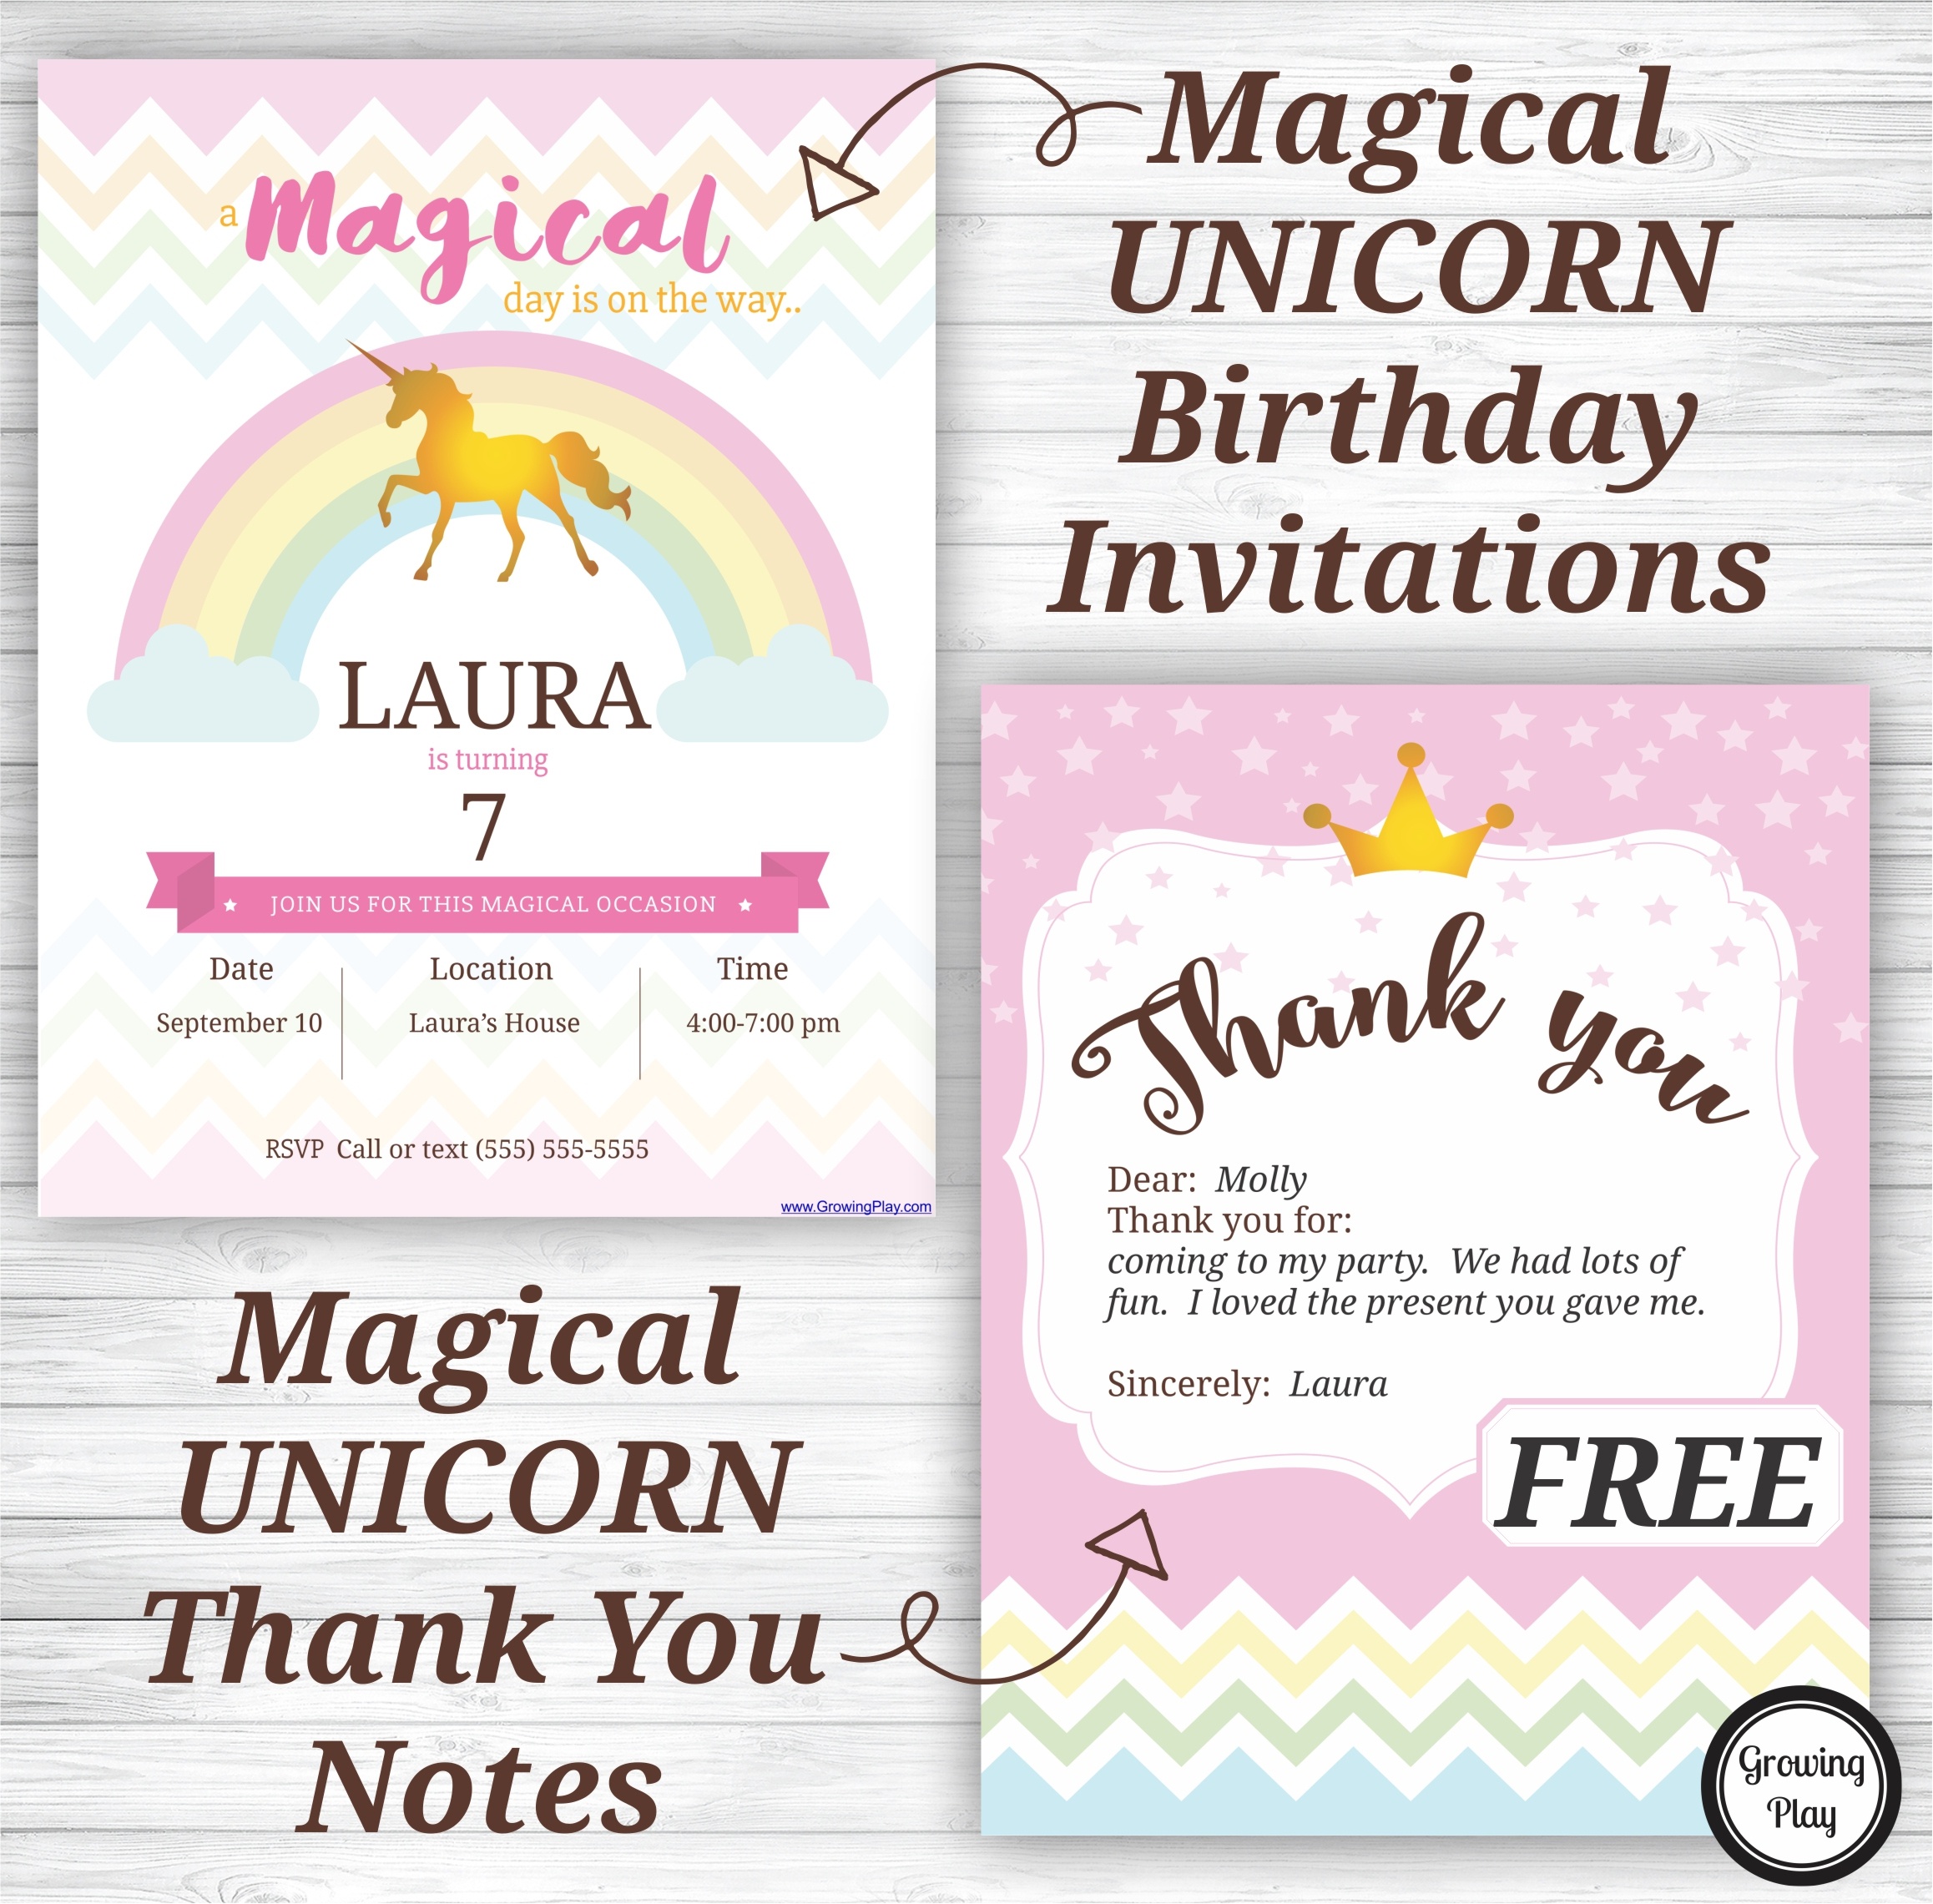 Unicorn Birthday Party Invitations And Thank You Notes - Free - Play Date Invitations Free Printable